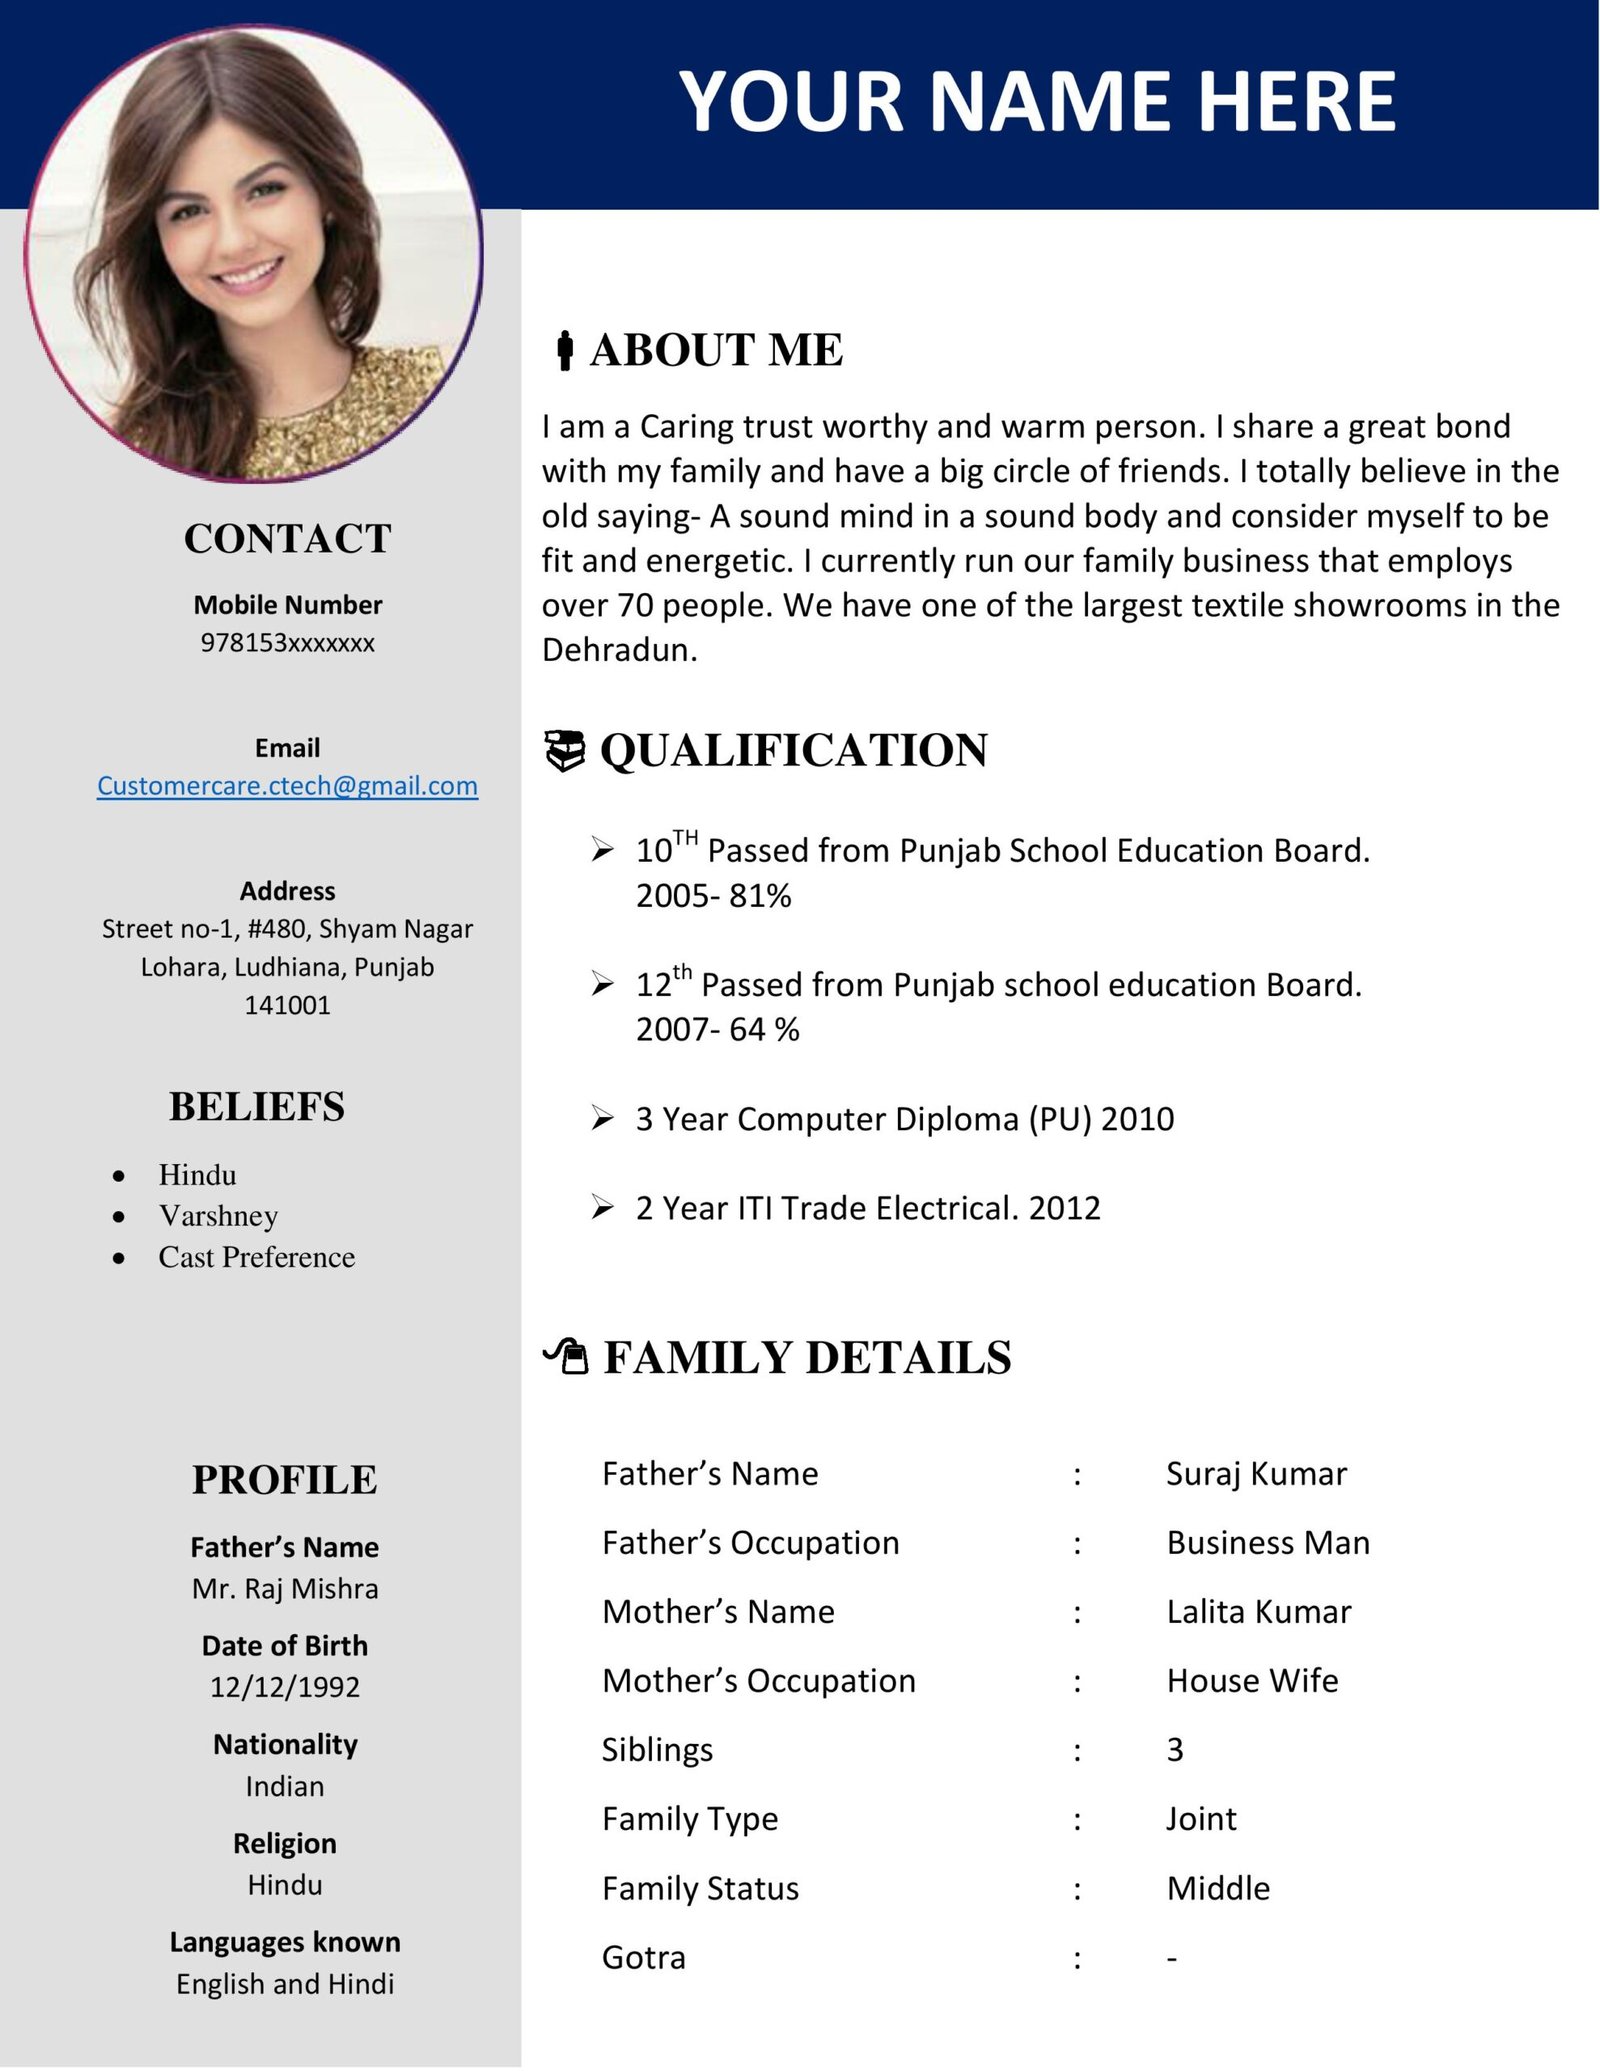 biodata-format-for-marriage-jpg-free-download-in-ms-word